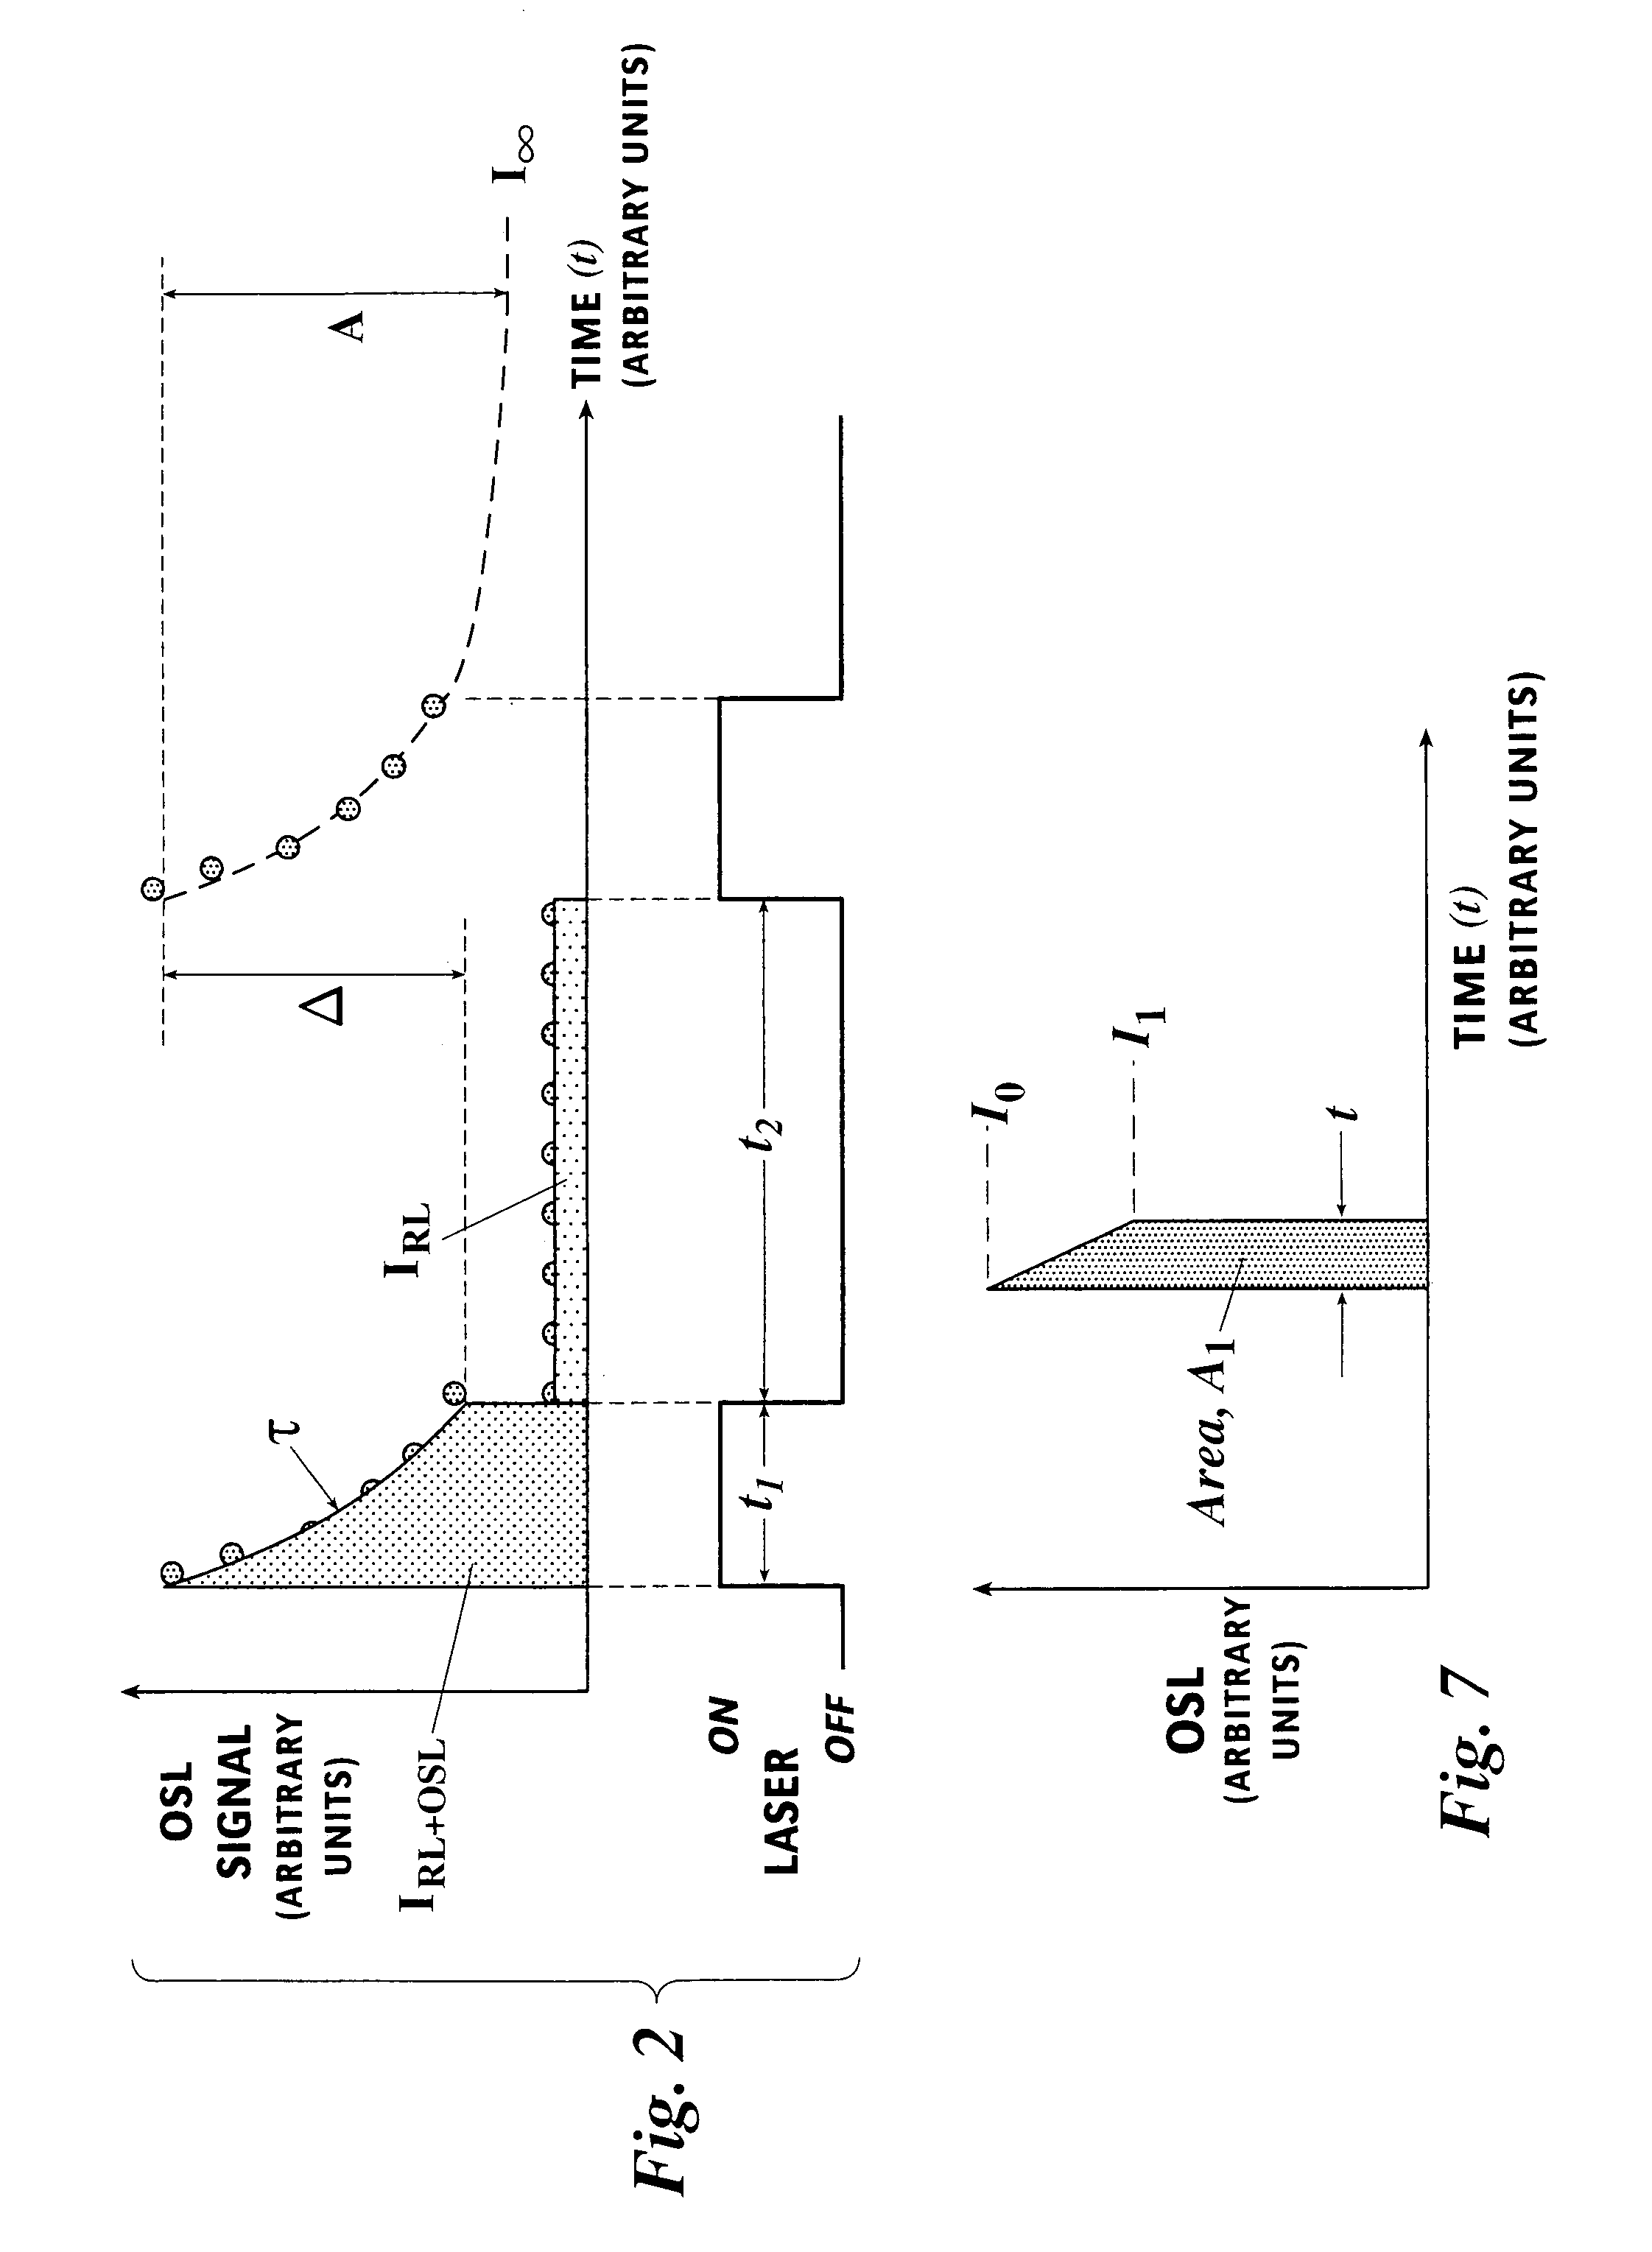 Optically stimulated luminescence radiation dosimetry method to determine integrated doses and dose rates and a method to extend the upper limit of measureable absorbed radiation doses during irradiation